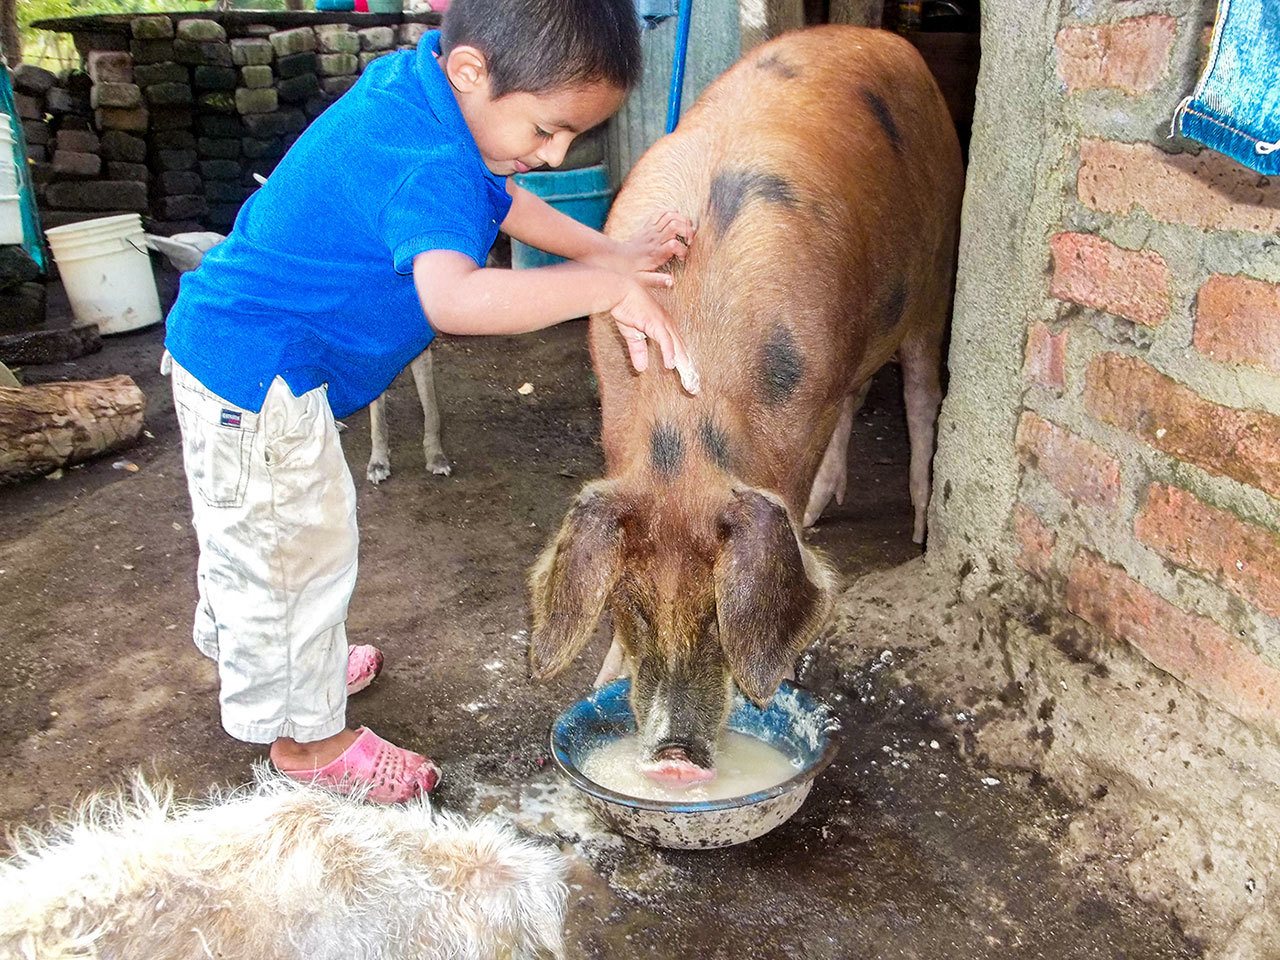 A child pets a pig while it eats, in this image from the Ometepe children’s photography project.                                Courtesy / Bainbridge Ometepe Sister Island Association